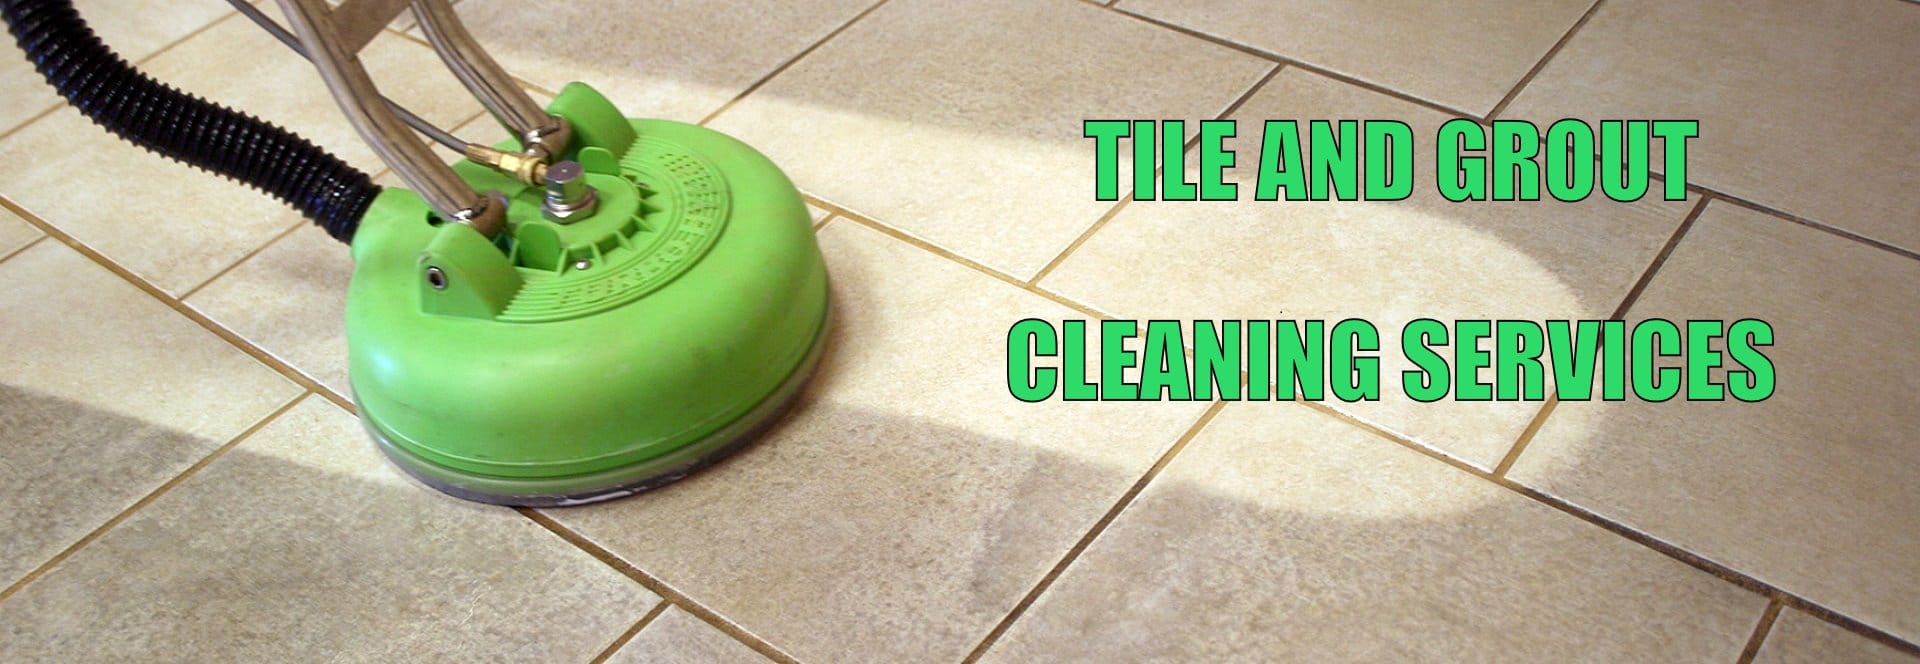 Tile and Grout Cleaning Kitchener-Waterloo